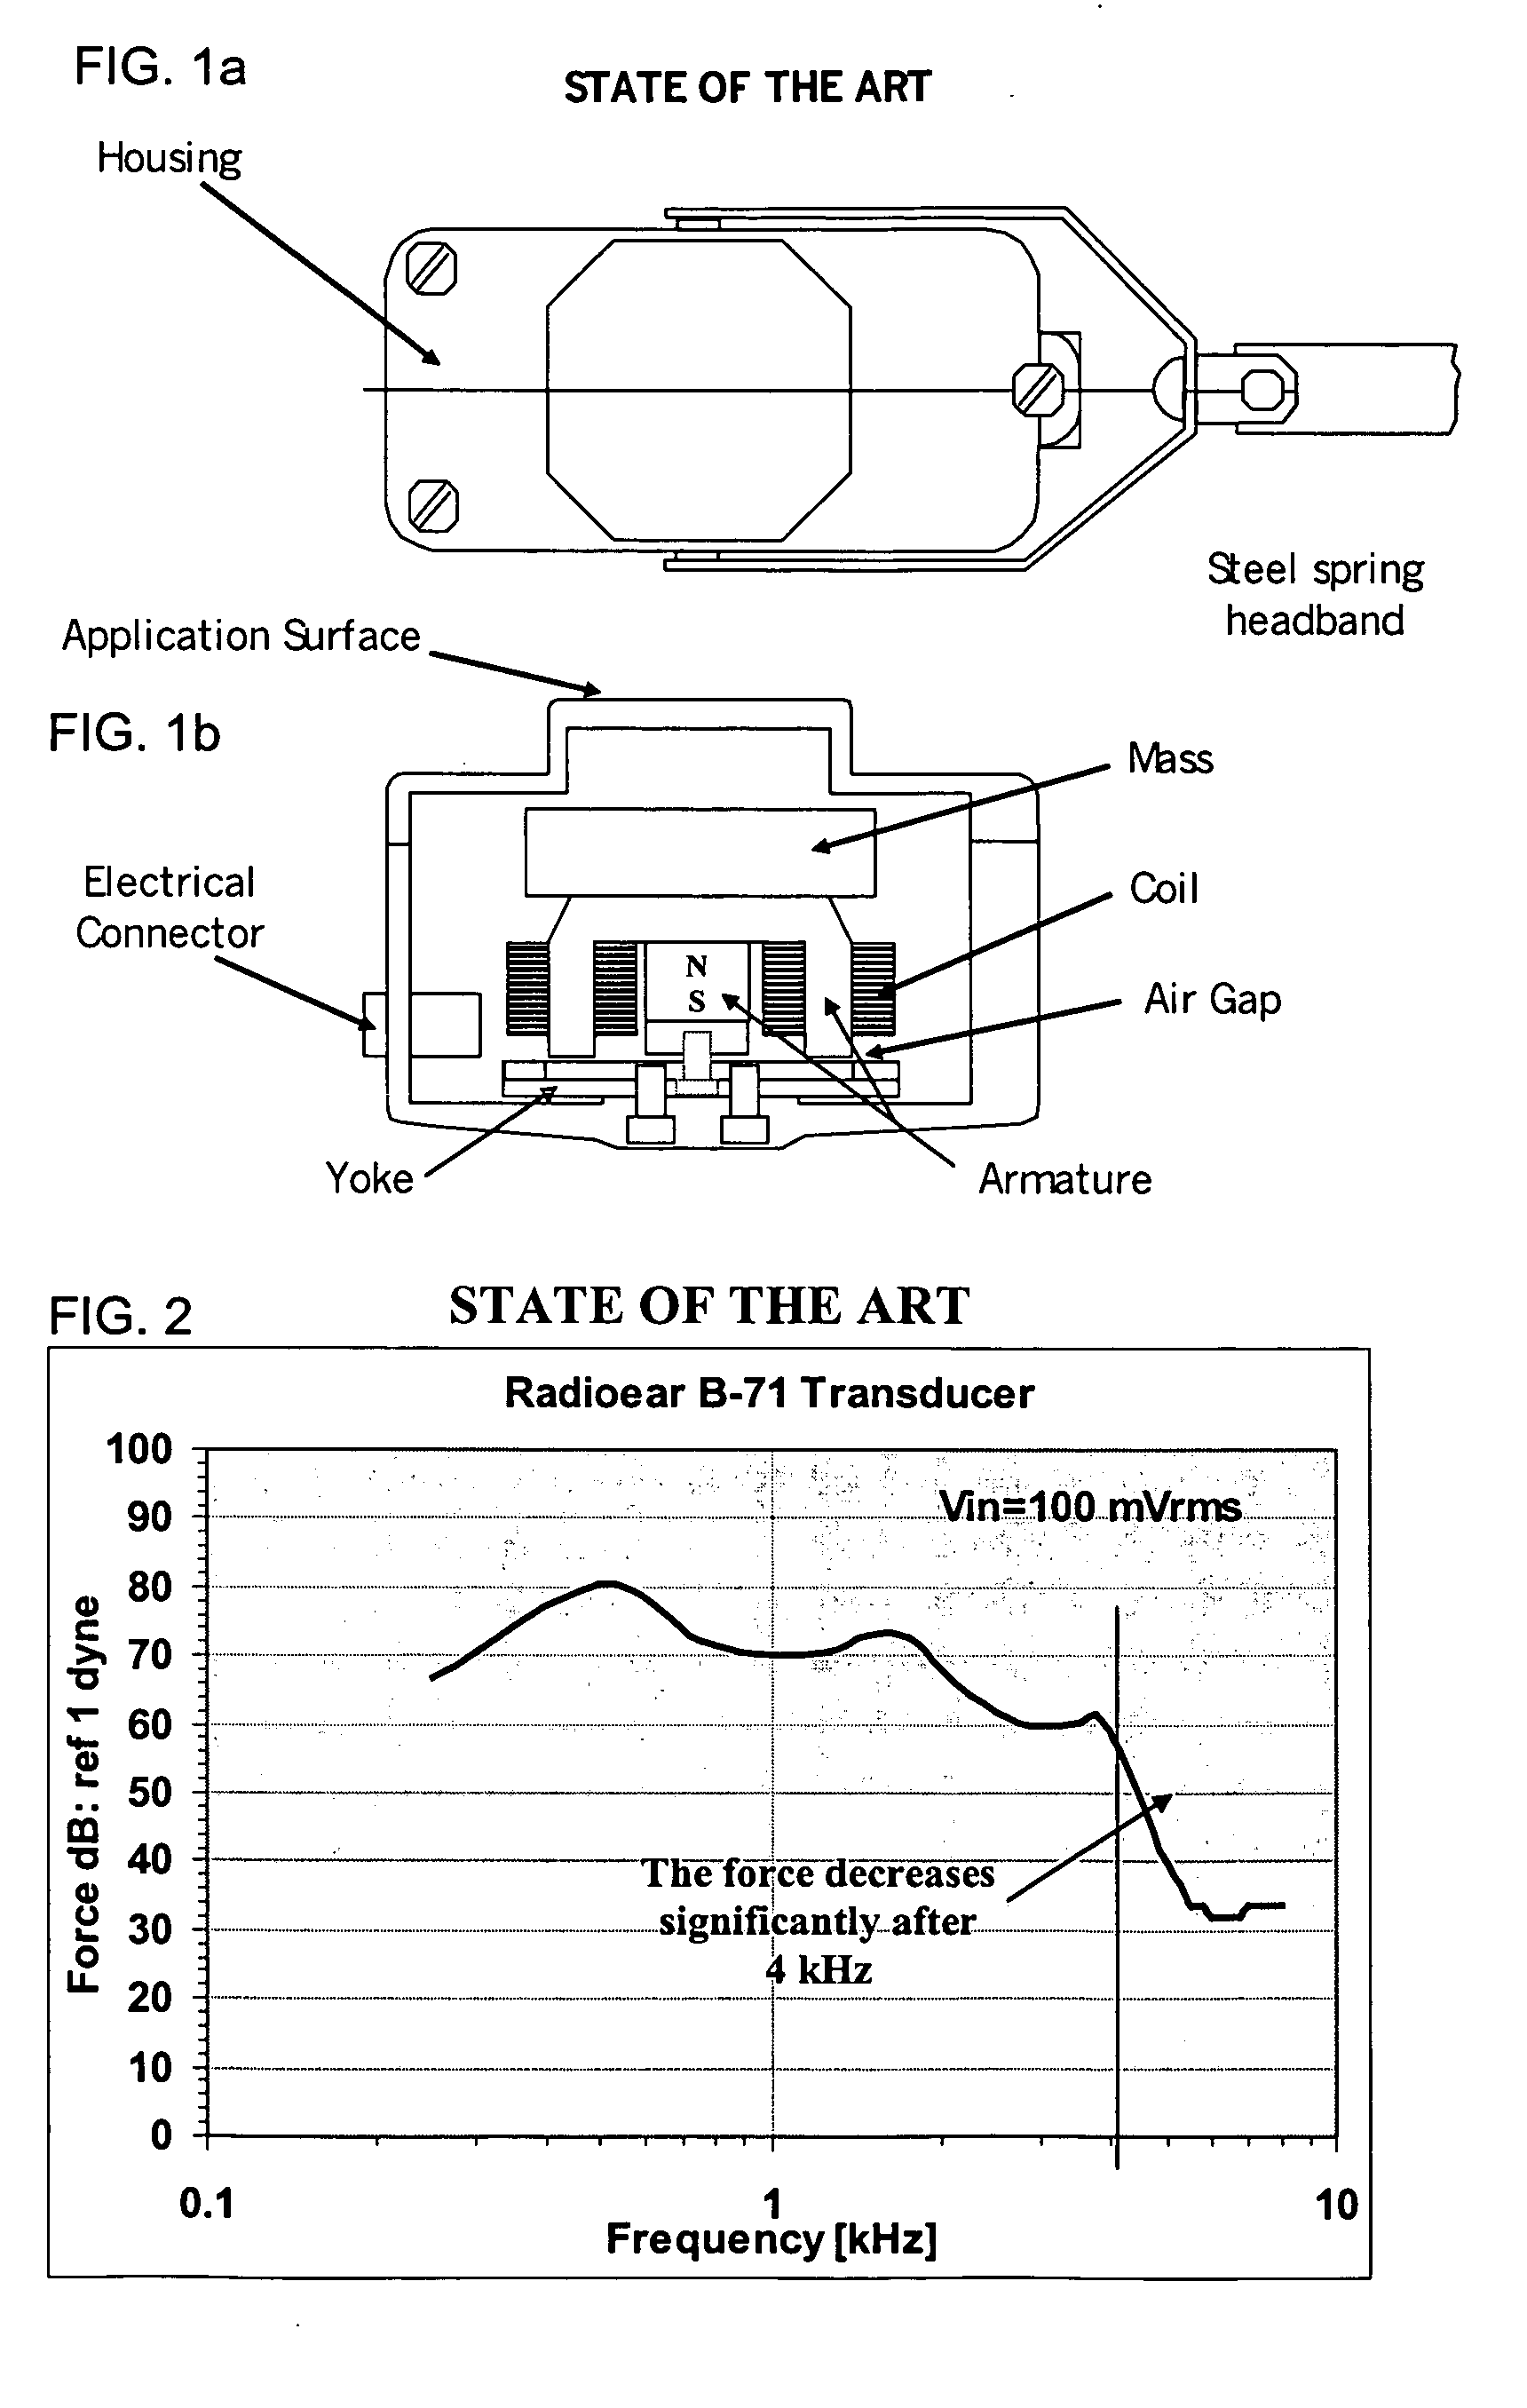 Bone-conduction hearing-aid transducer having improved frequency response